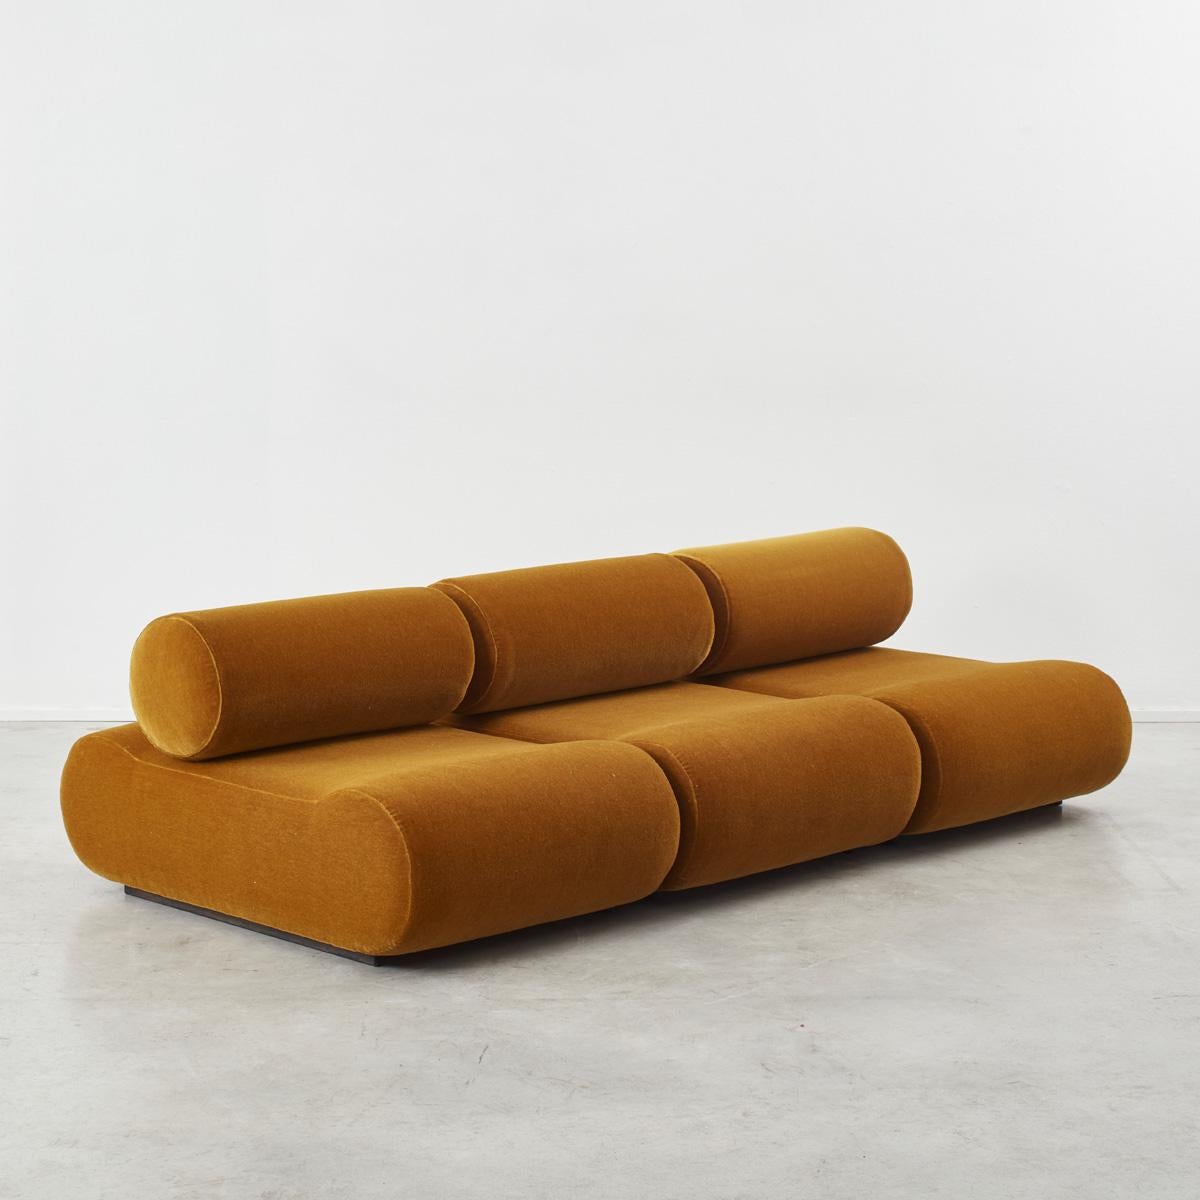 Designed in 1969 but unveiled at the 1972 Cologne international furniture fair in Germany, Klaus Uredat’s sofa design involves elements that can be rearranged in a wide variety of possible configurations. The two pieces of each seat, themselves